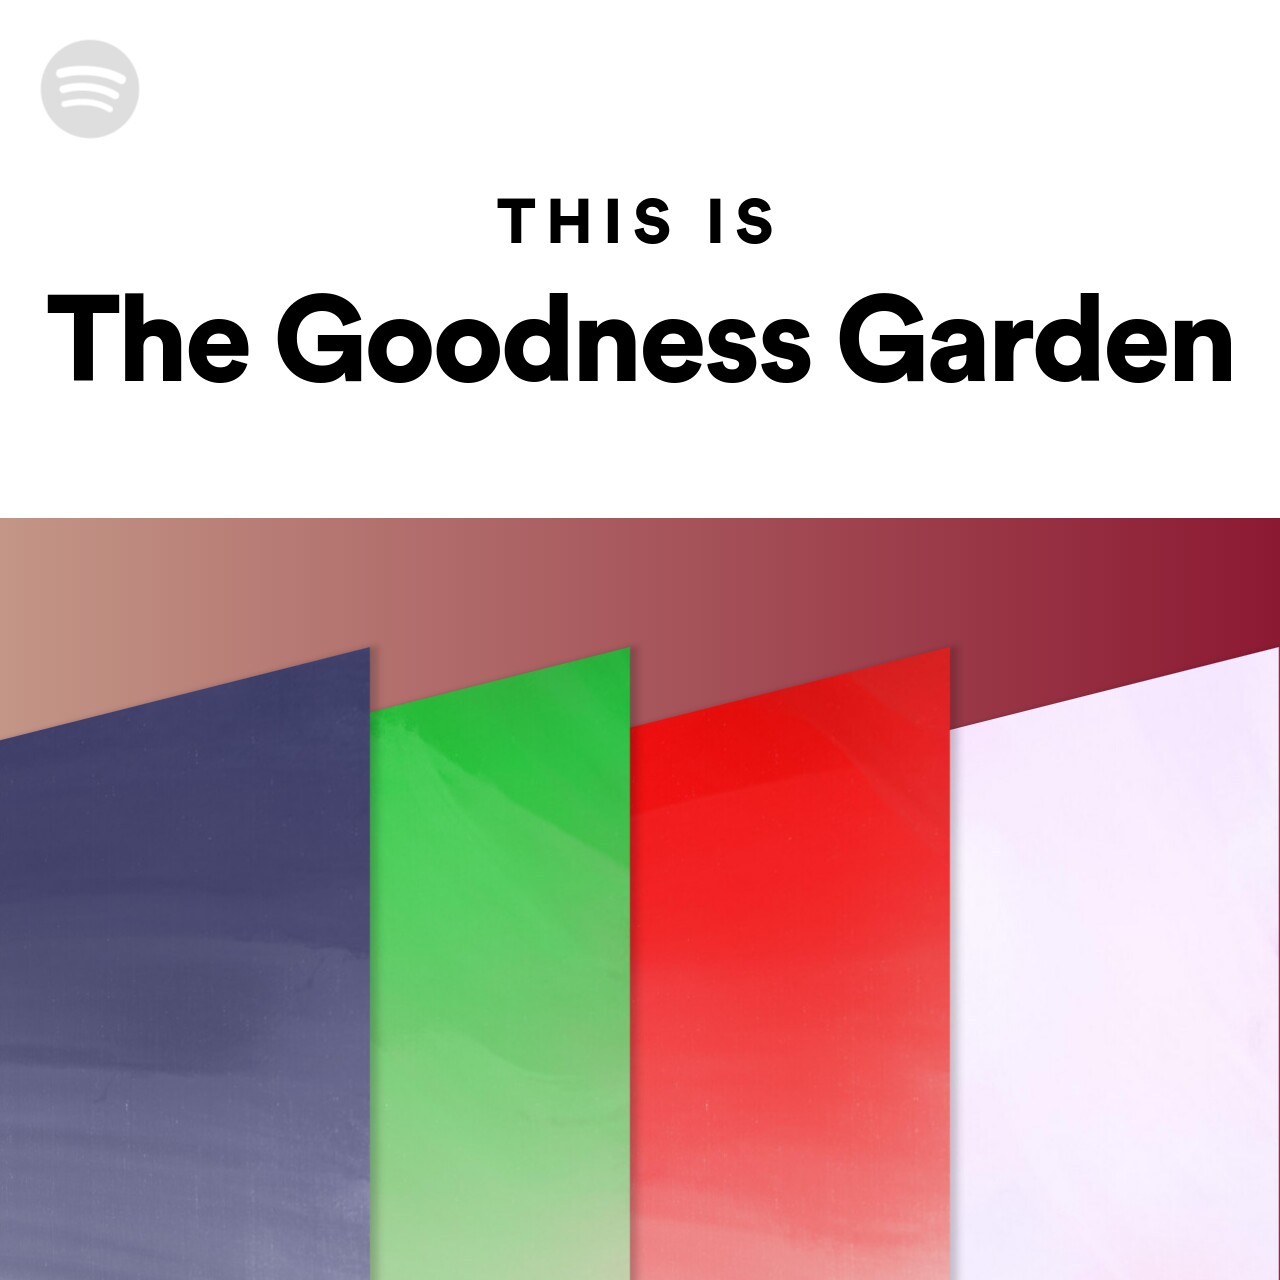 This Is The Goodness Garden